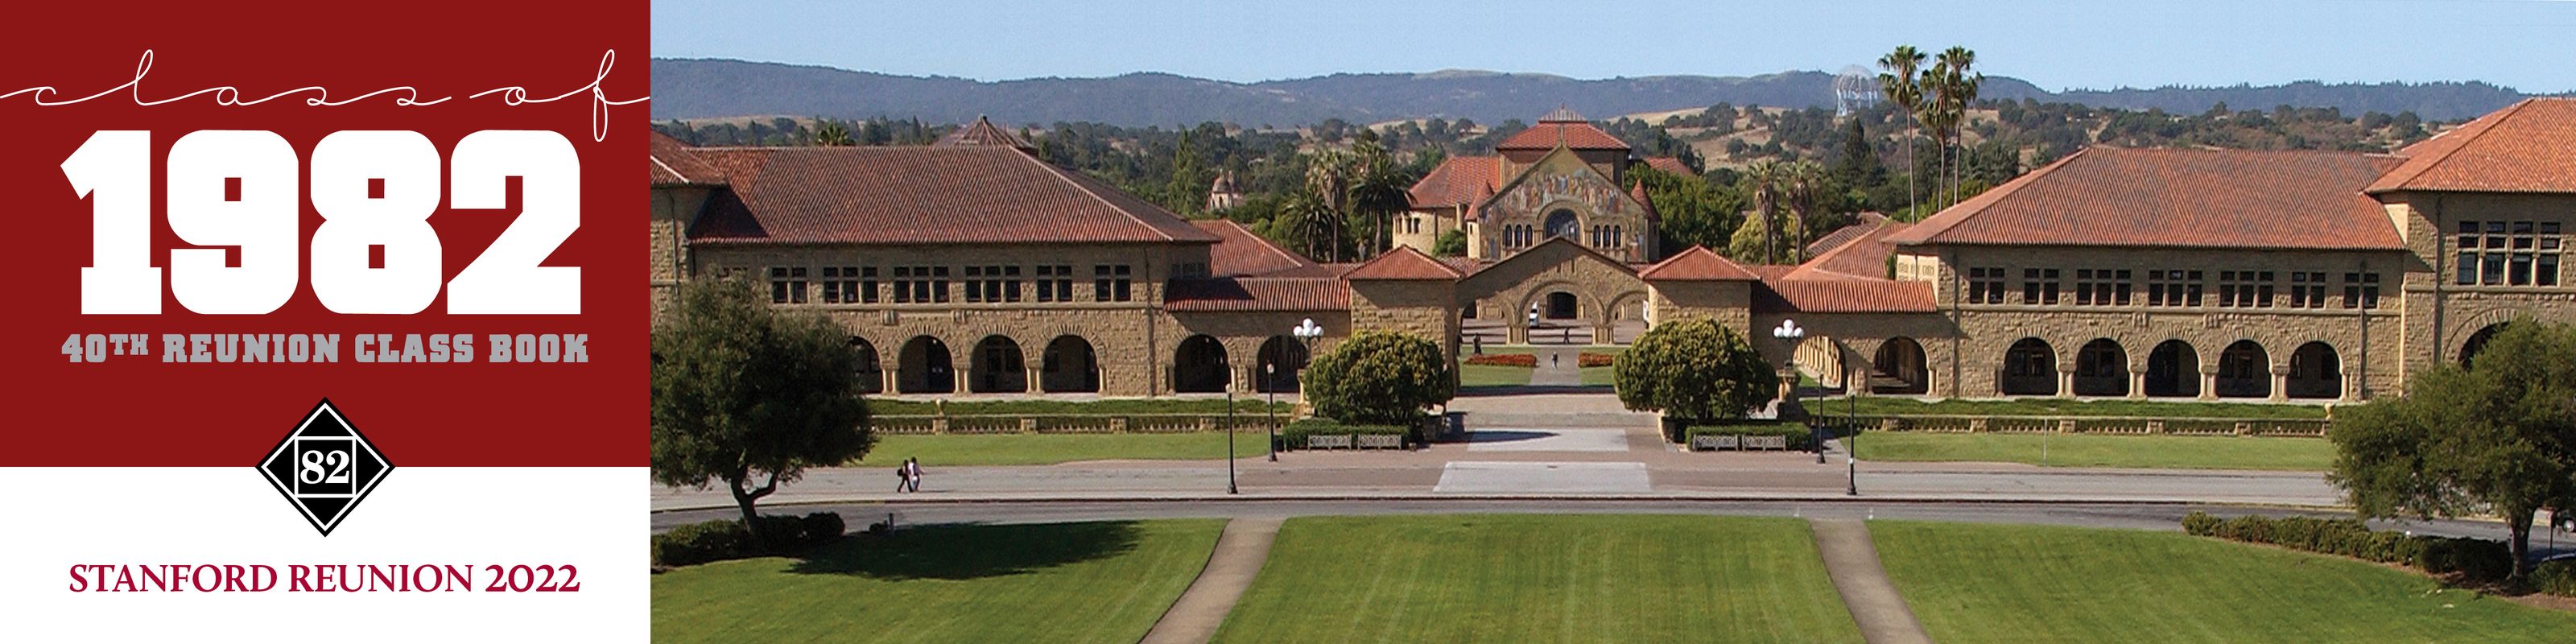 Stanford Class of 1982 – 40th Reunion